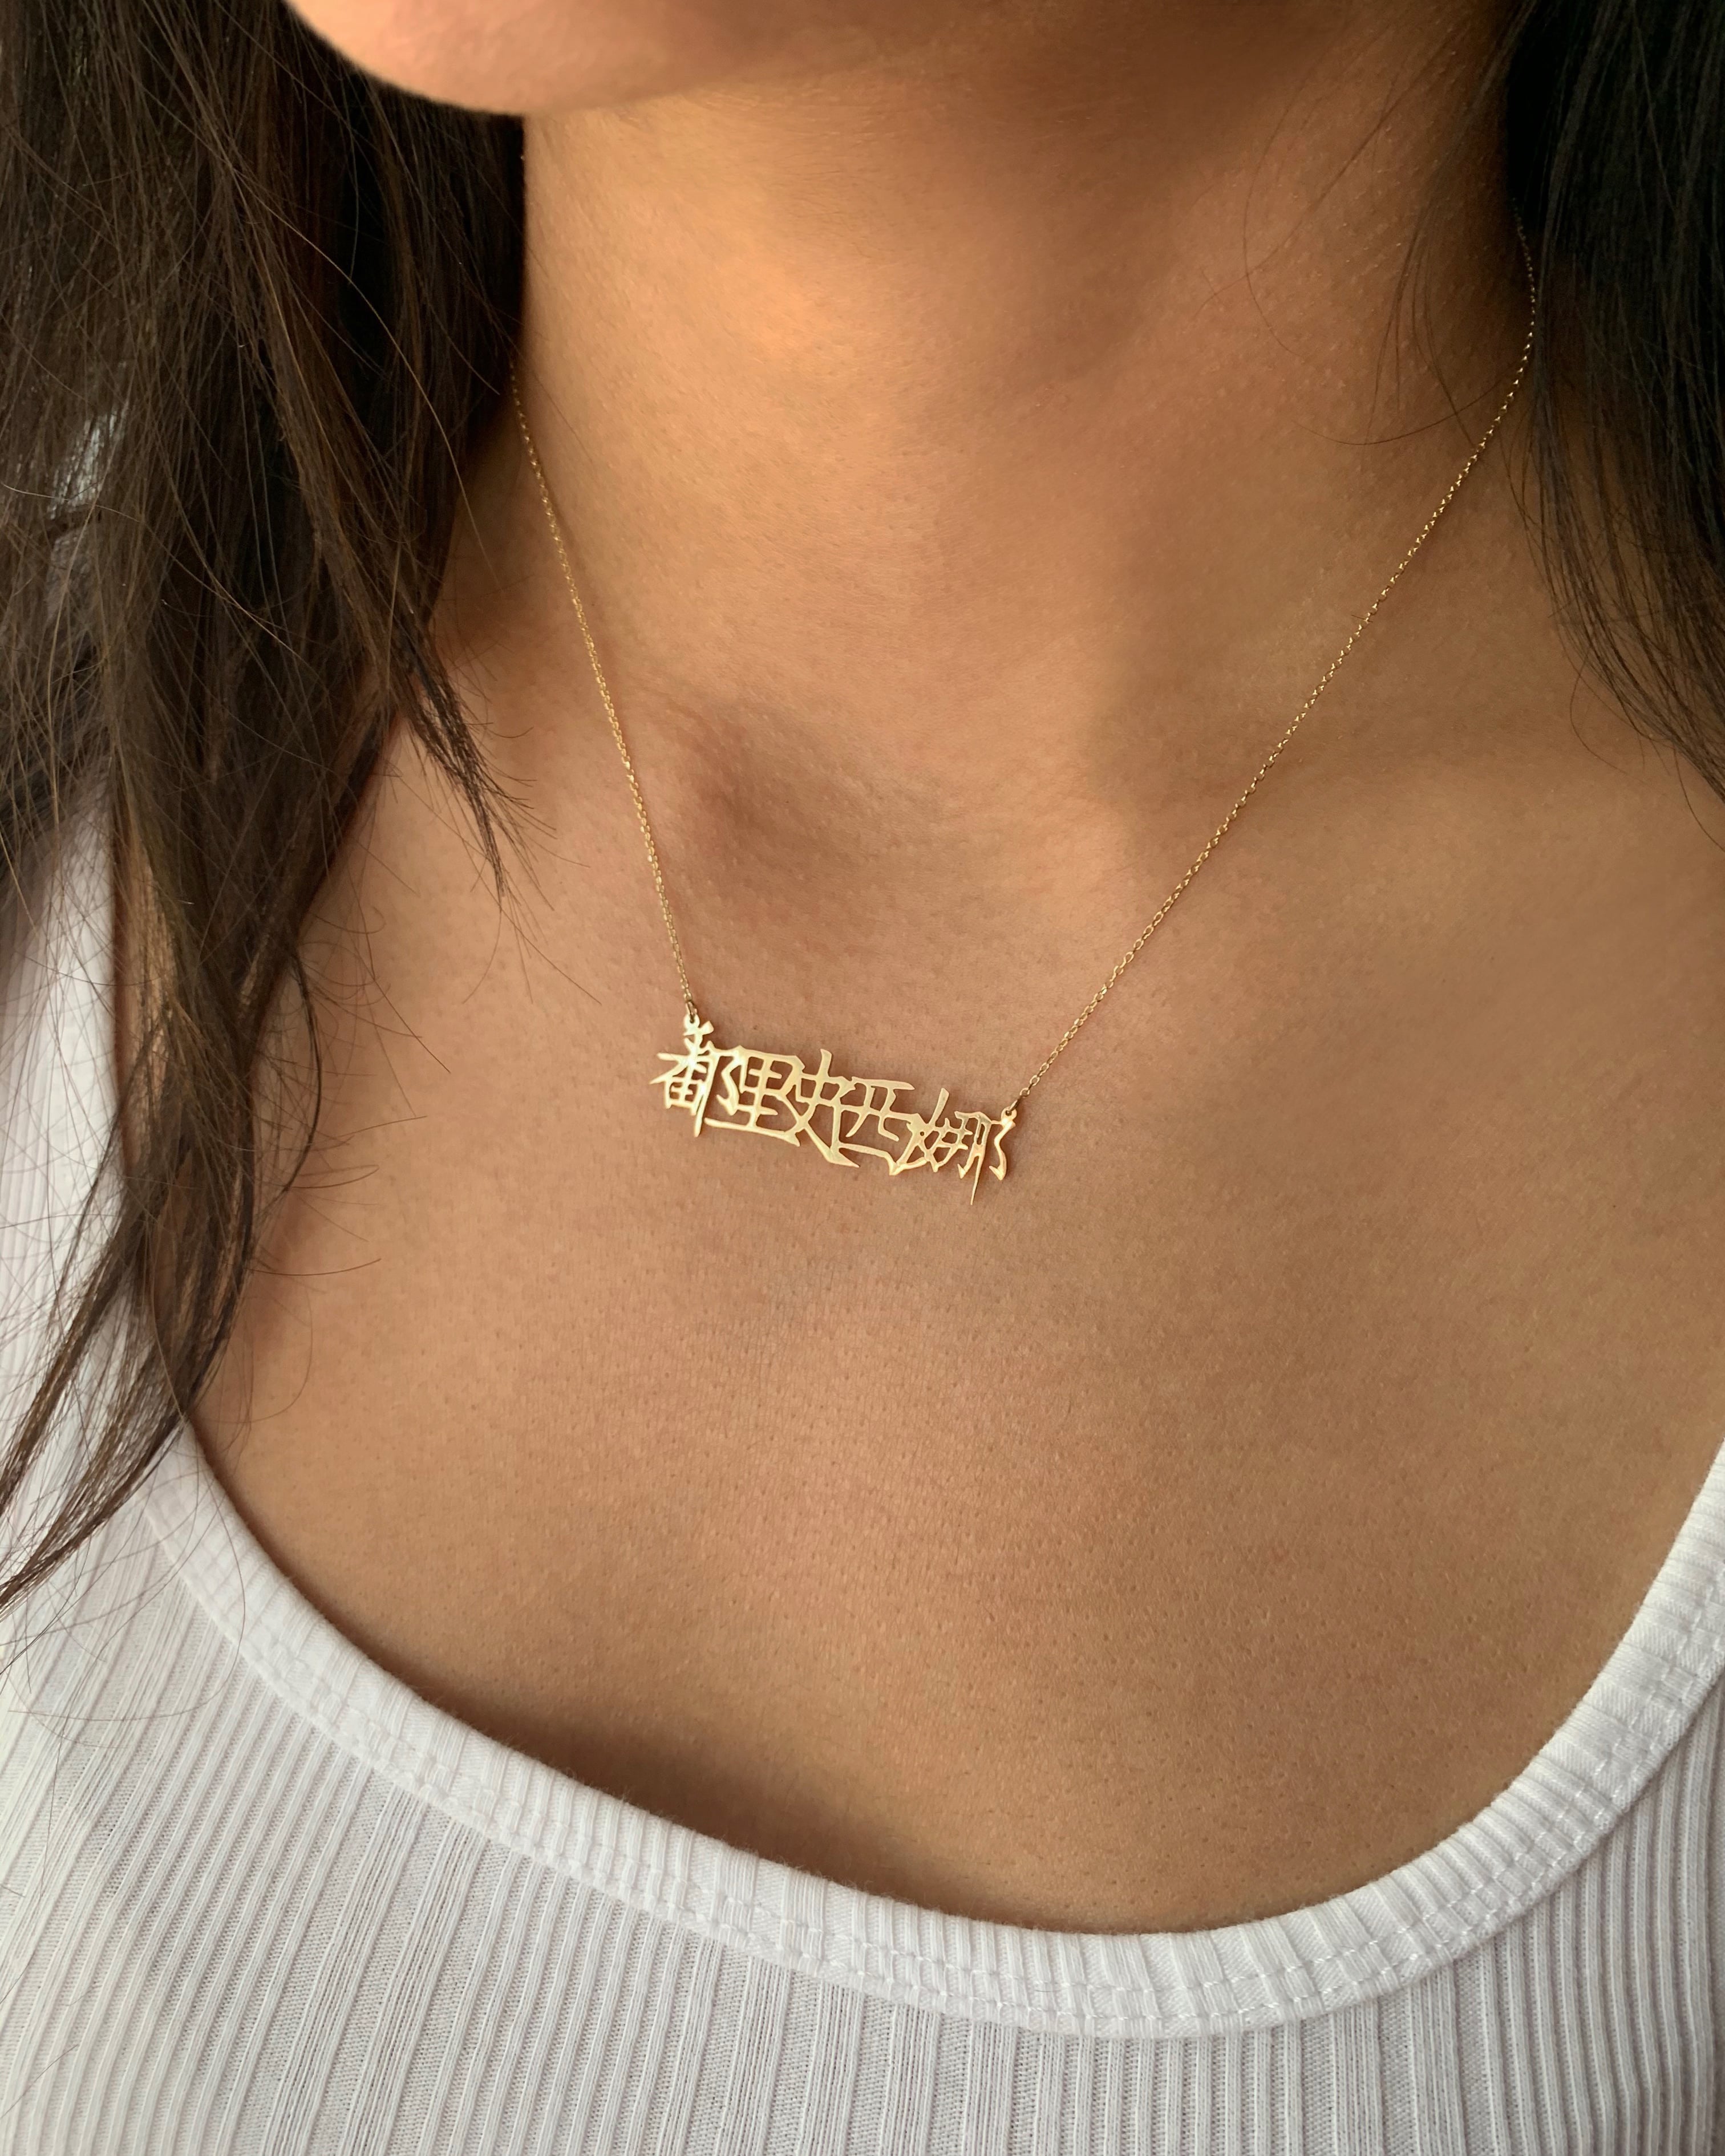 Keep Going Necklace – Able